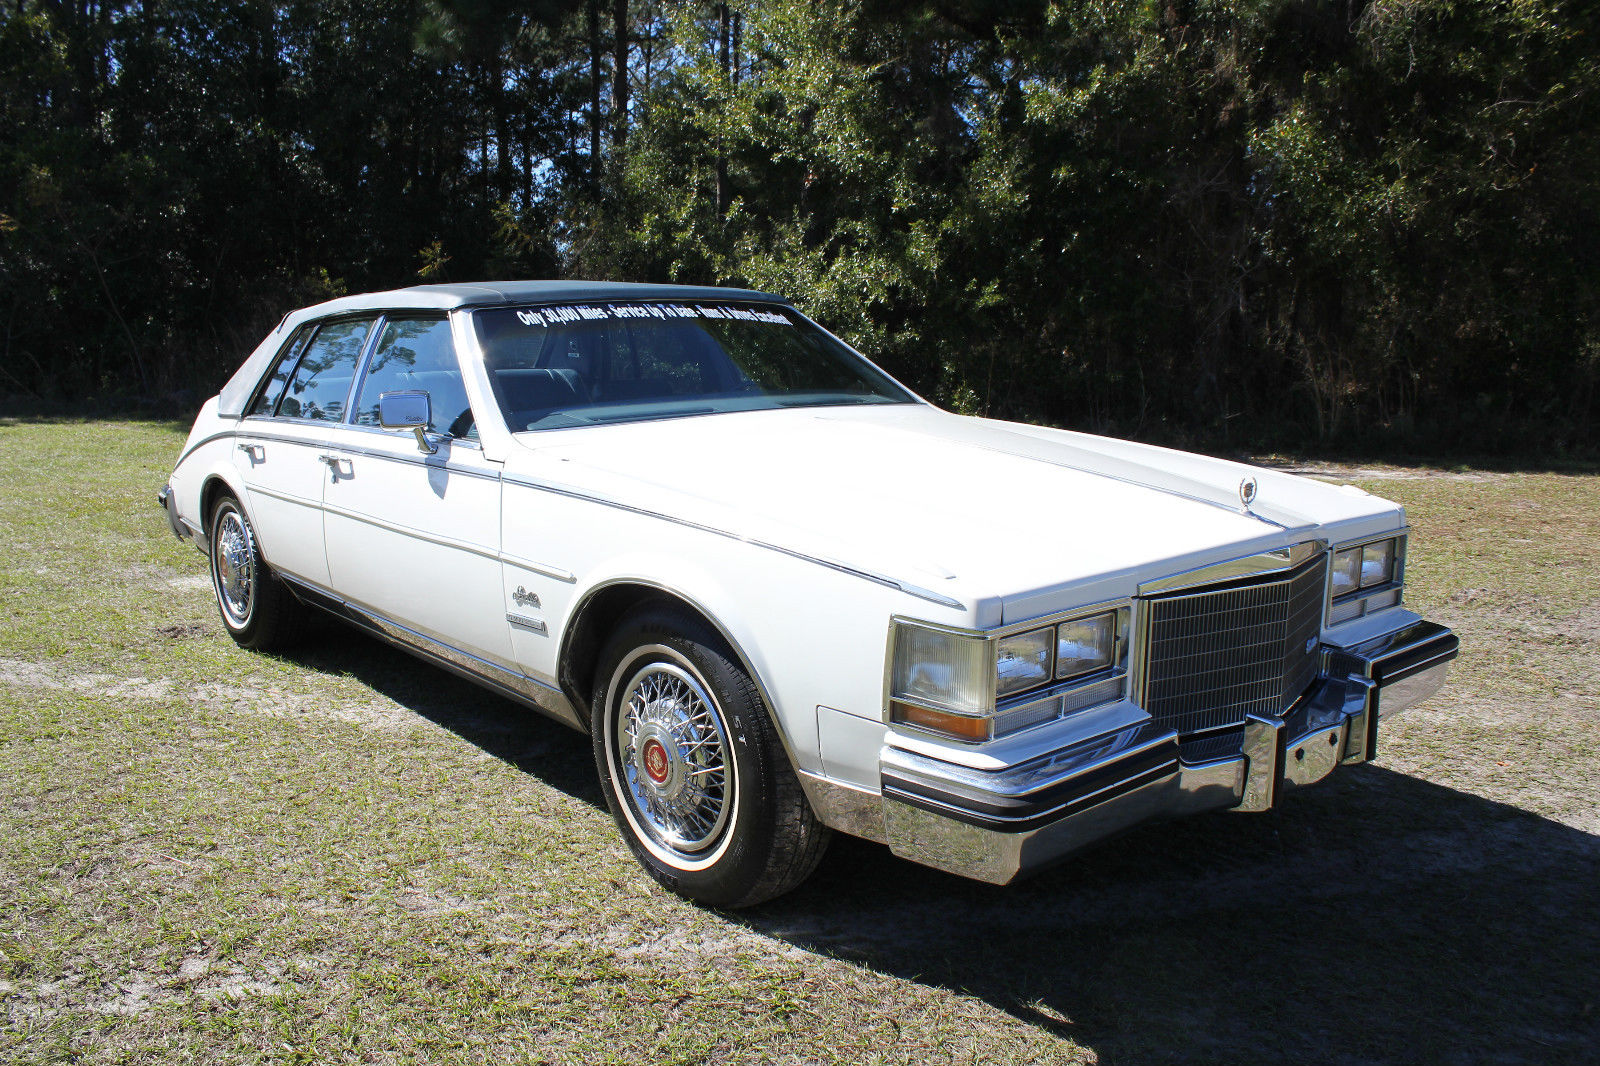 1983 Cadillac Seville Don't Miss IT Call NOW 407-832-1759 Don't Miss IT